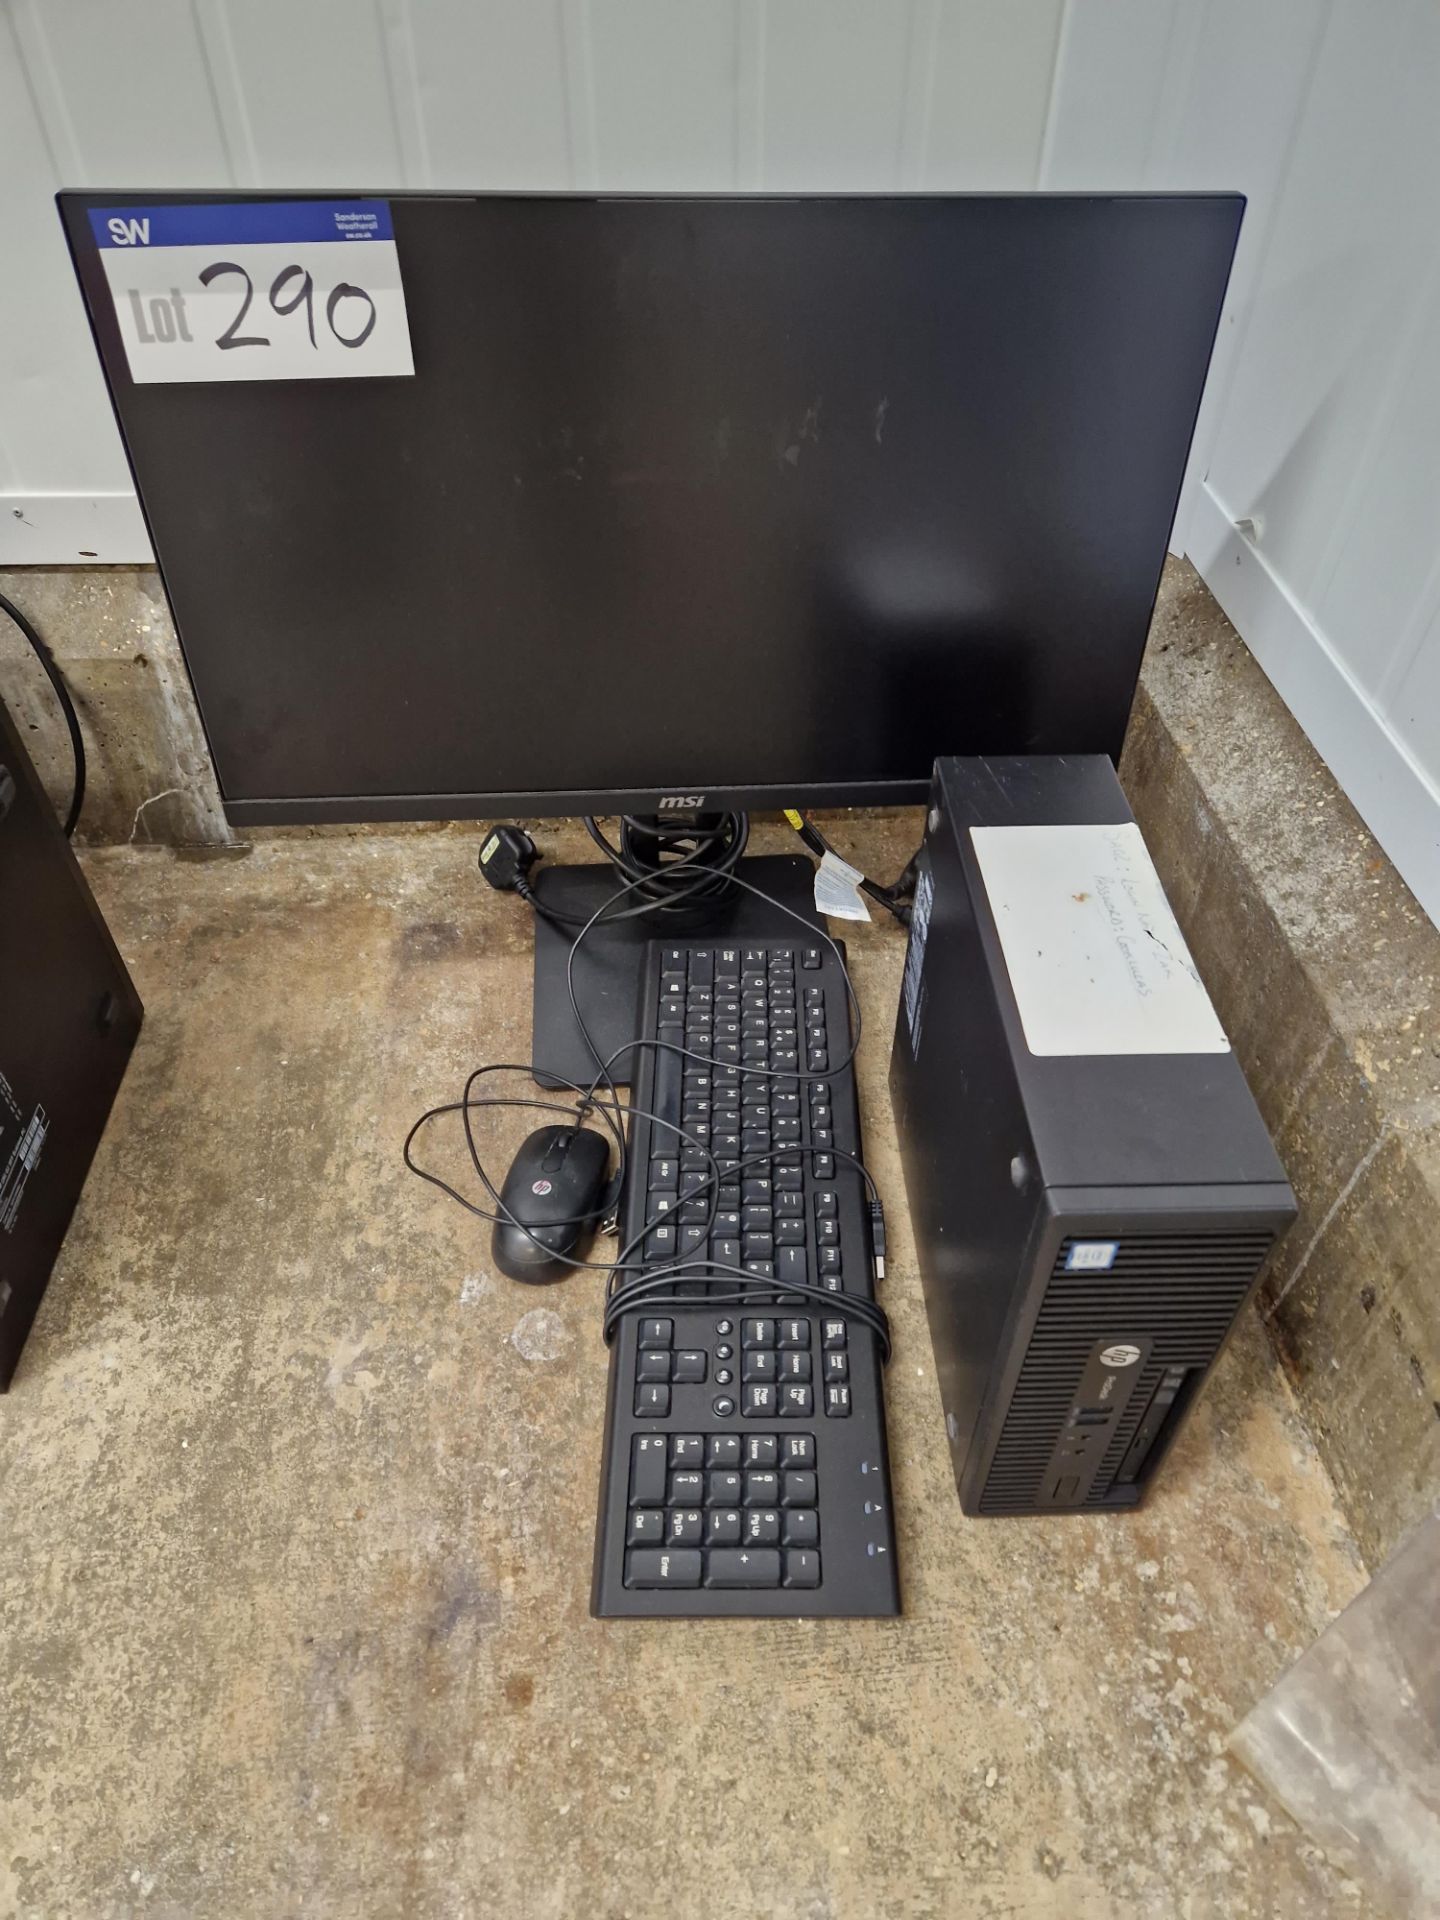 HP ProDesk 400 G3 Core i5 Desktop PC, with MSI monitor, keyboard and mouse (Hard Drive Wiped)